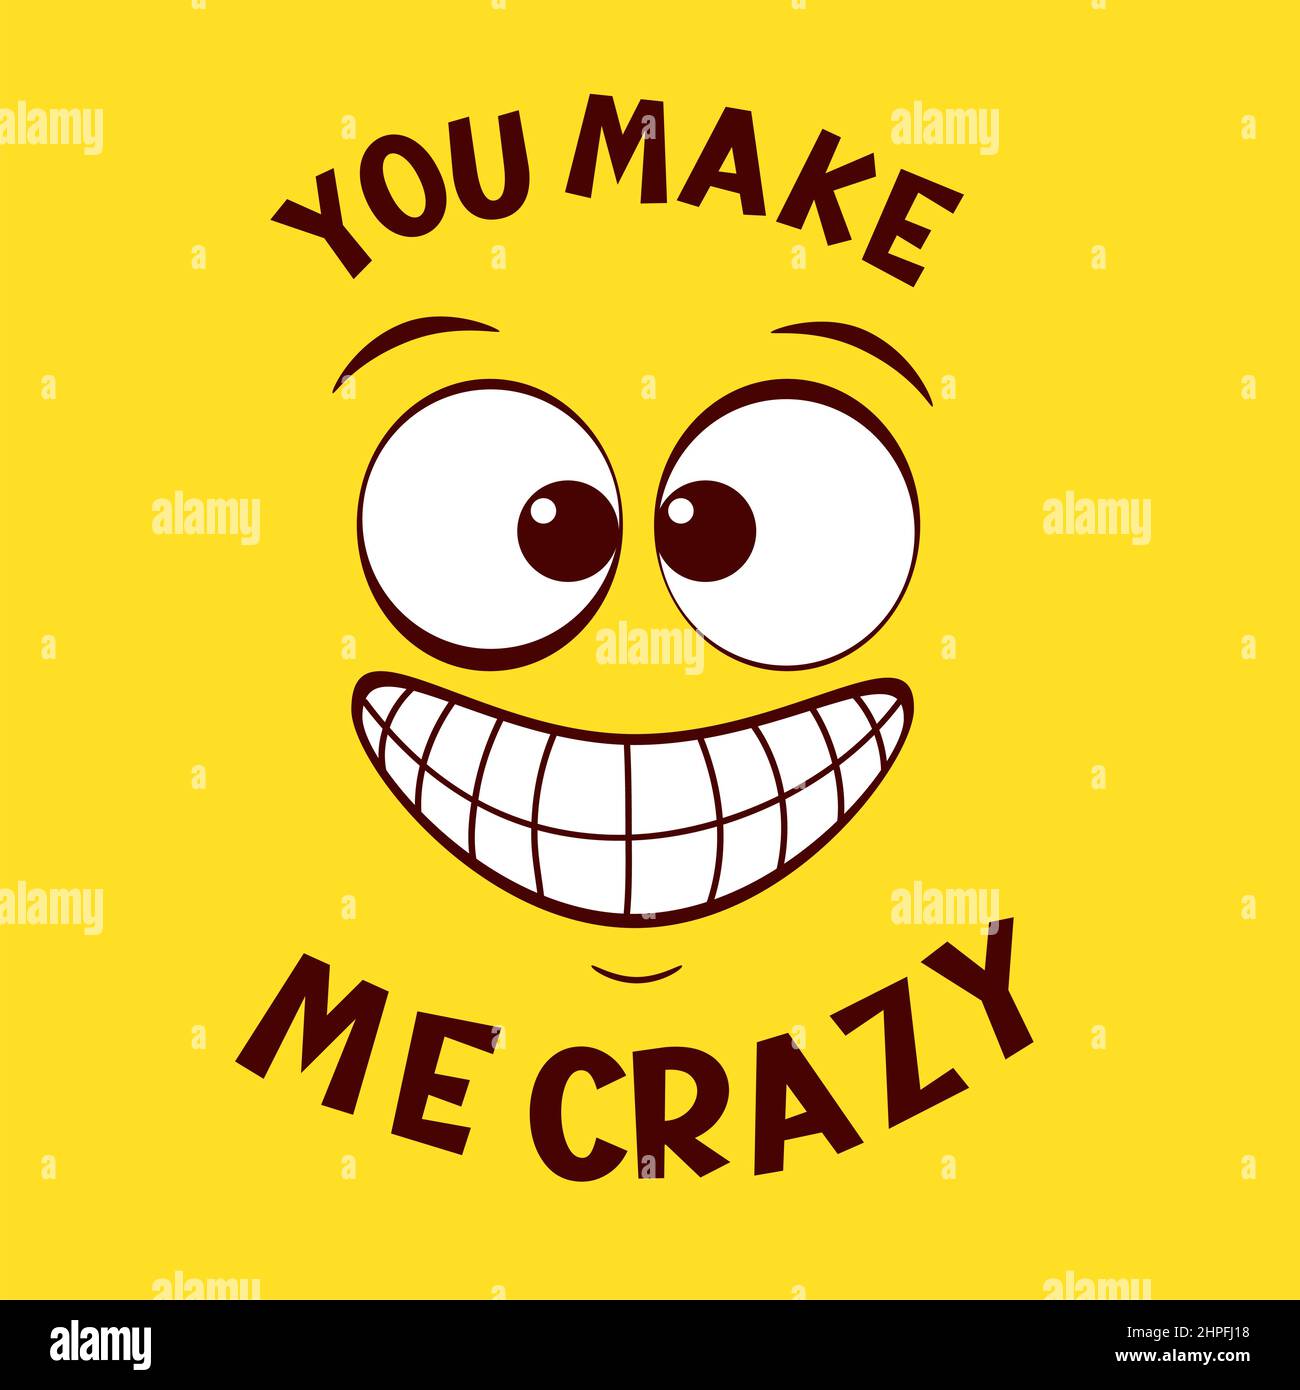 Funny Emoji Crazy Face Emoticon On Yellow Background Inscription You Make Me Crazy Can Be